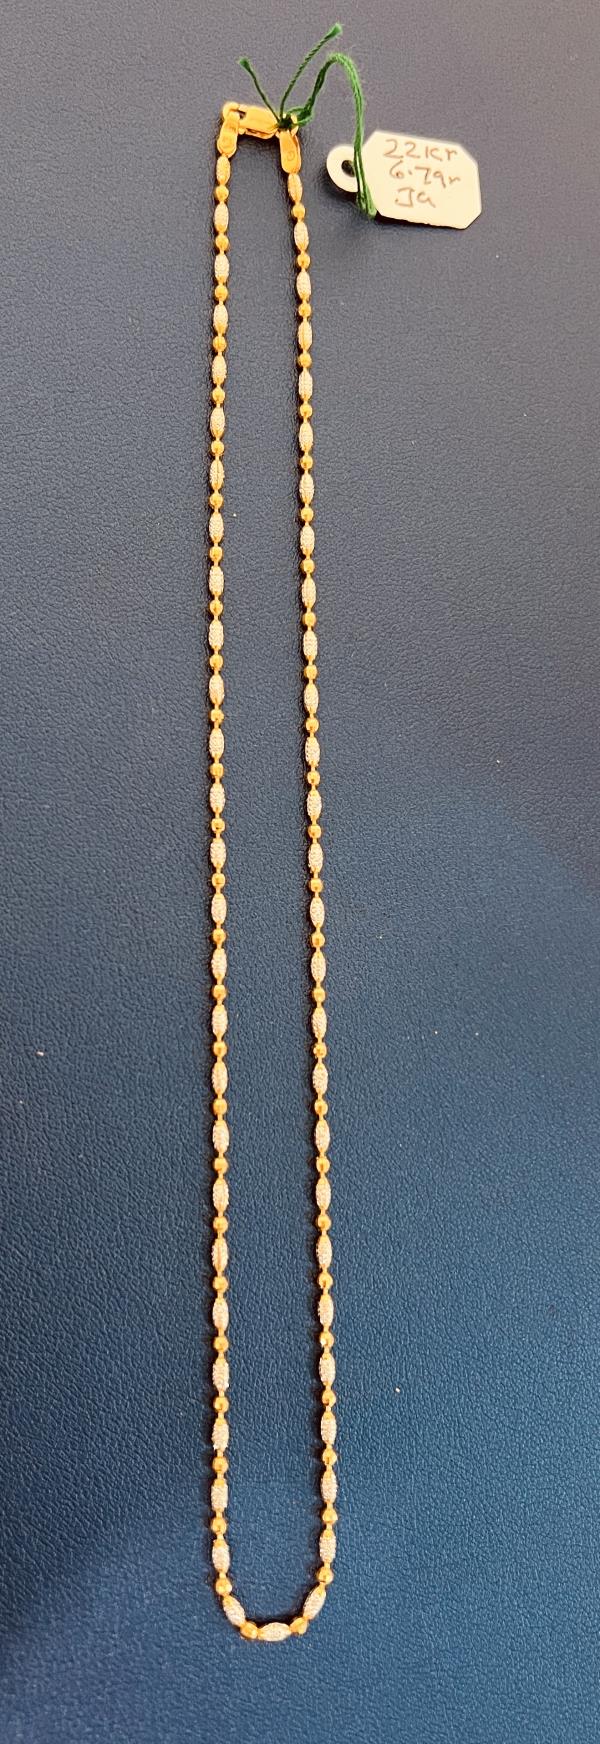 22KT GOLD CHAIN 14" TWO TONE 6.7GM